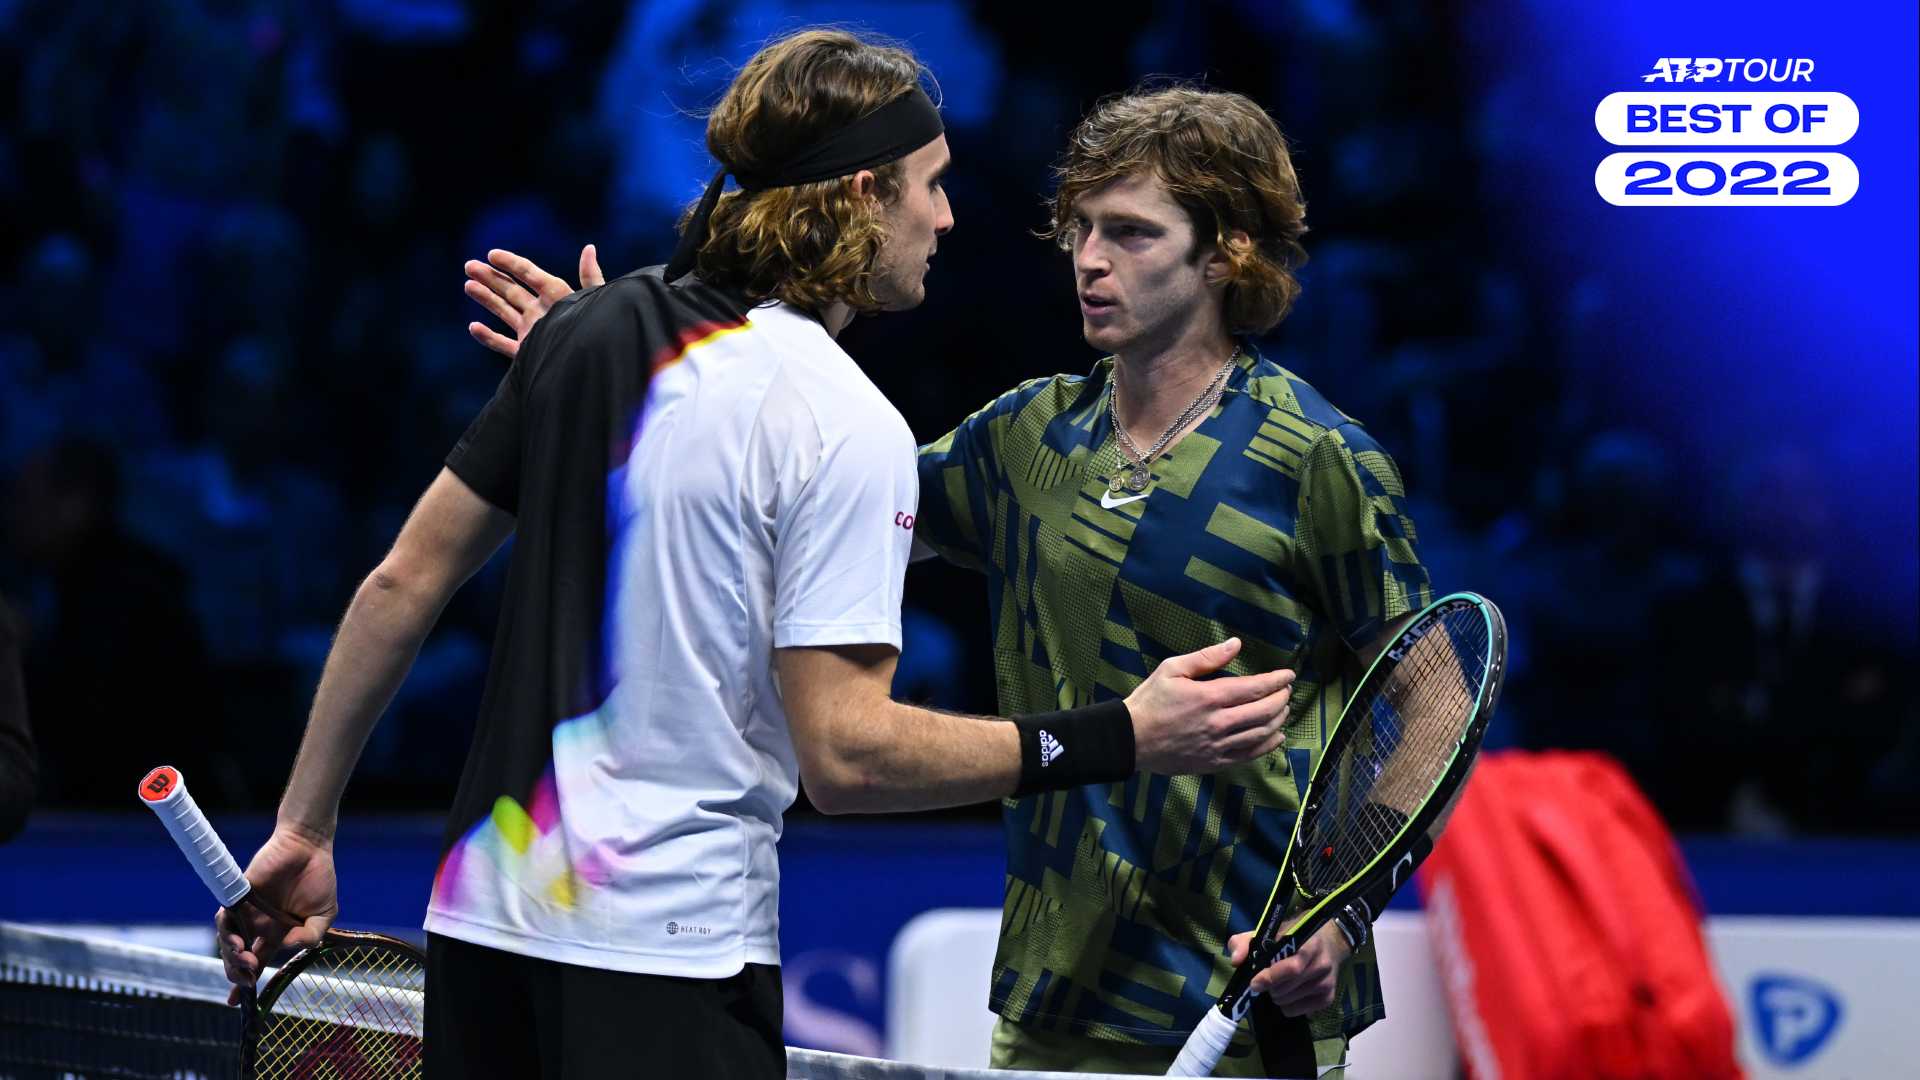 Rivalries Of 2022 Andrey Rublev vs